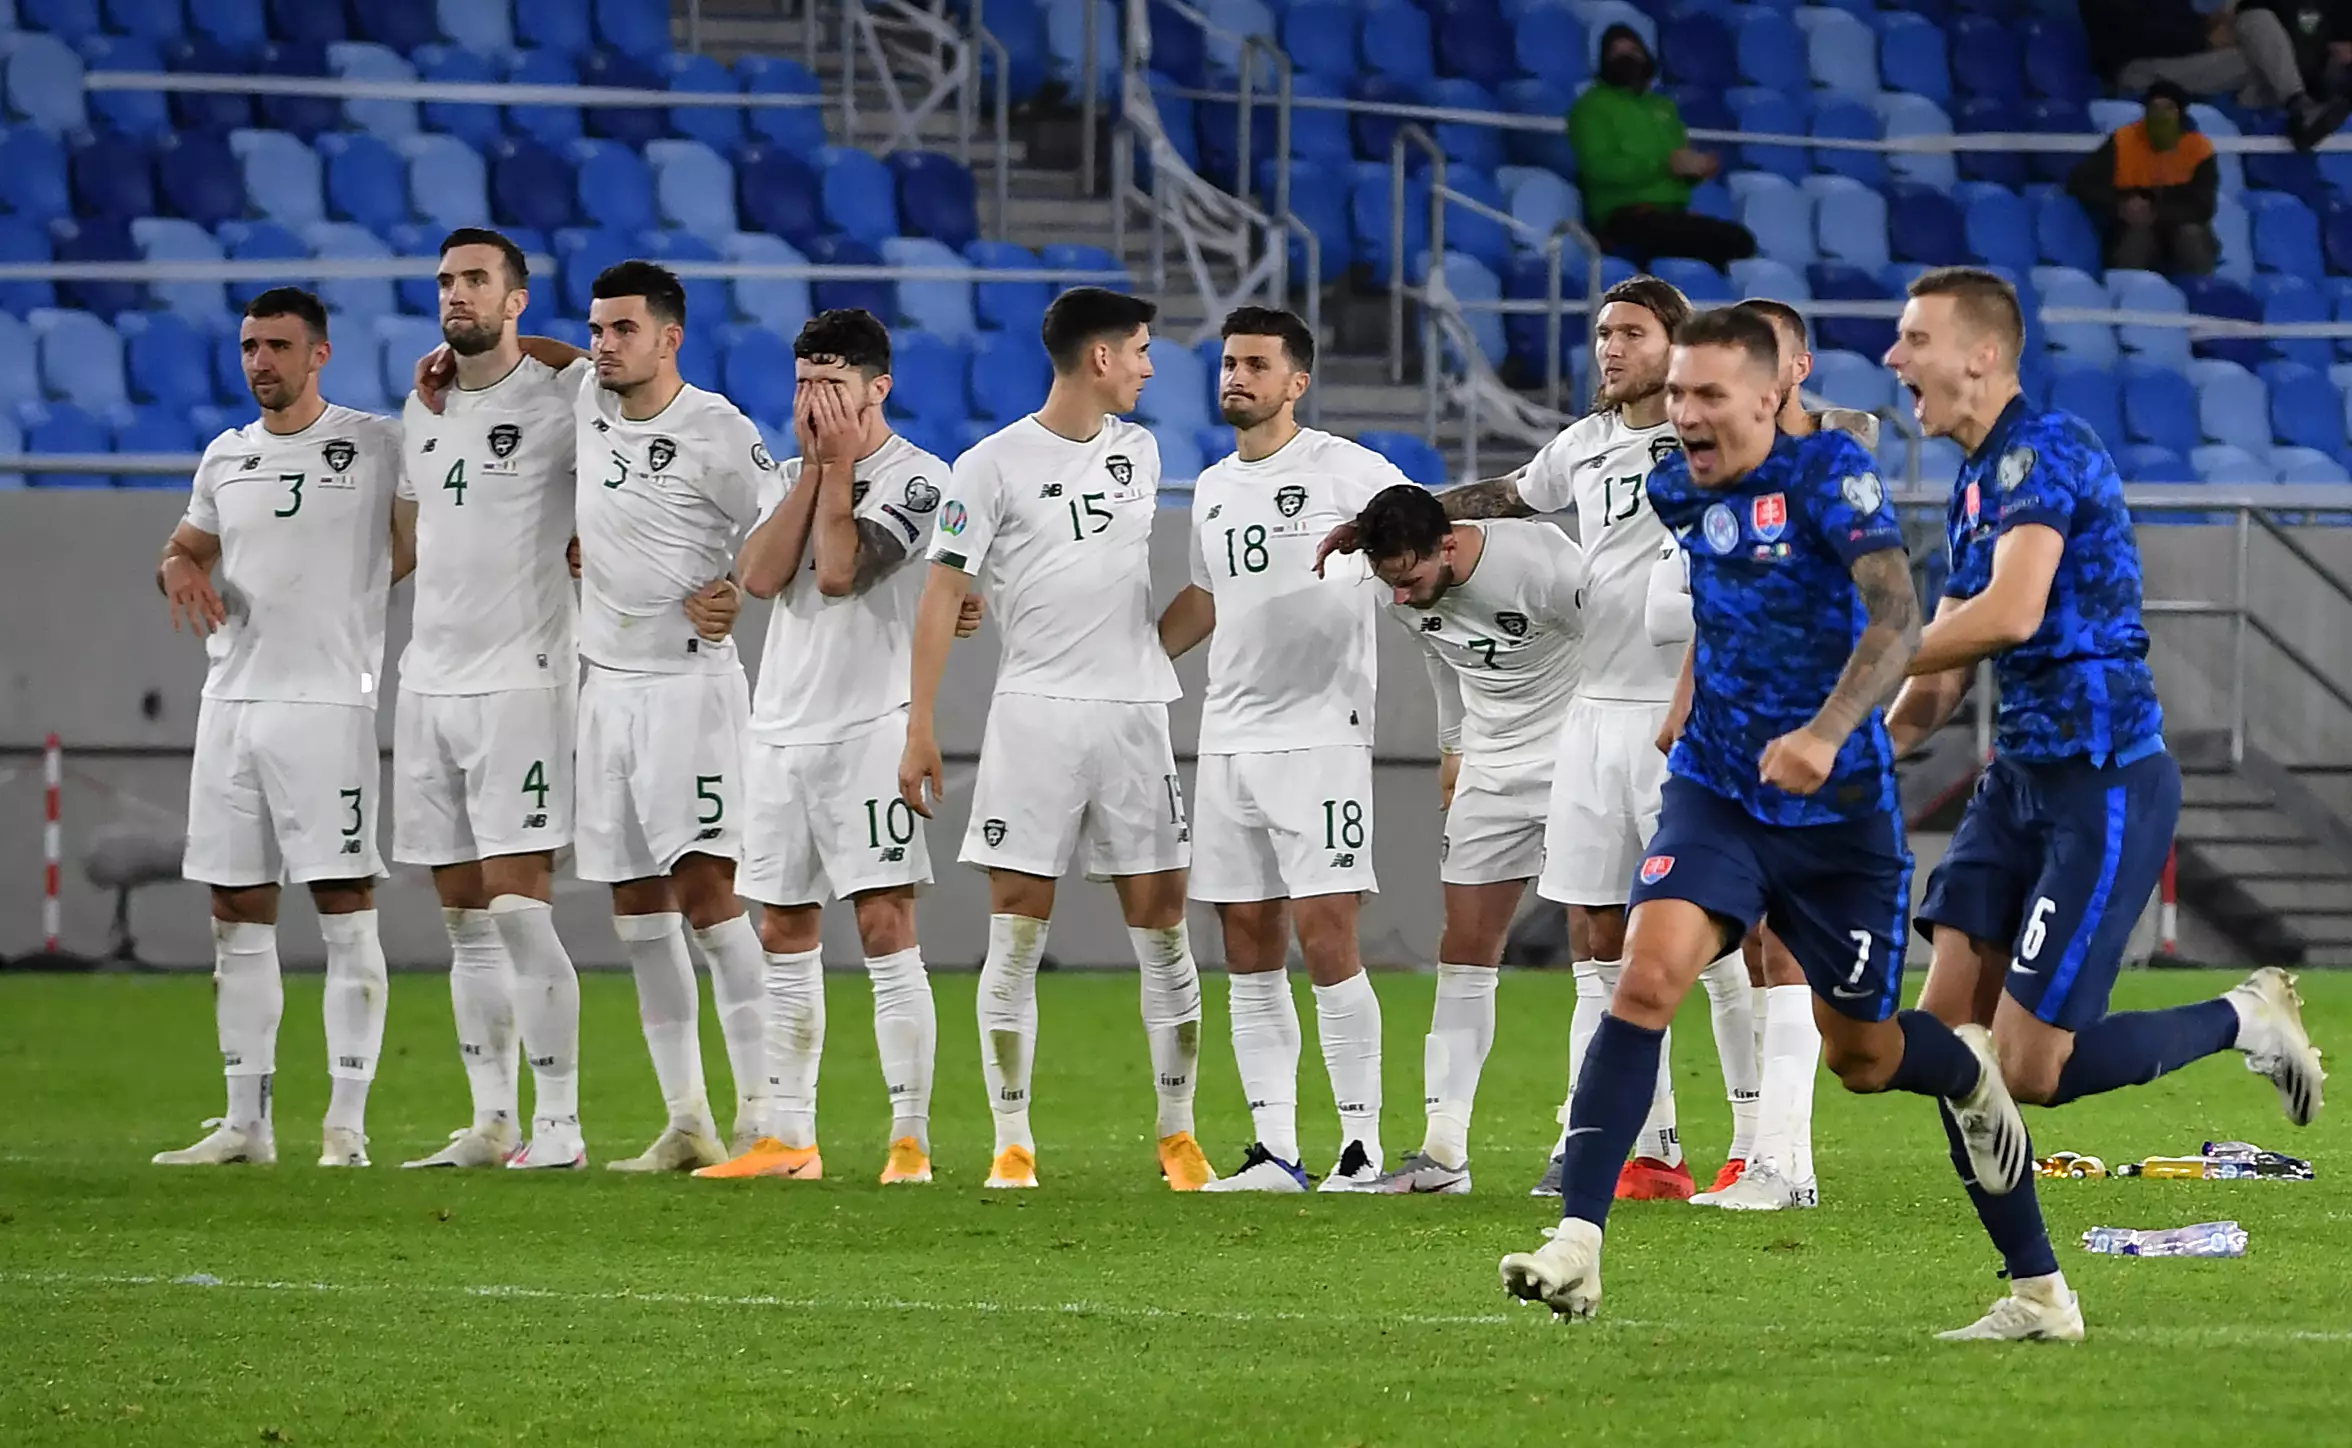 Slovakia players celebrate penalty win whilst Ireland players look distraught. Image: PA Images